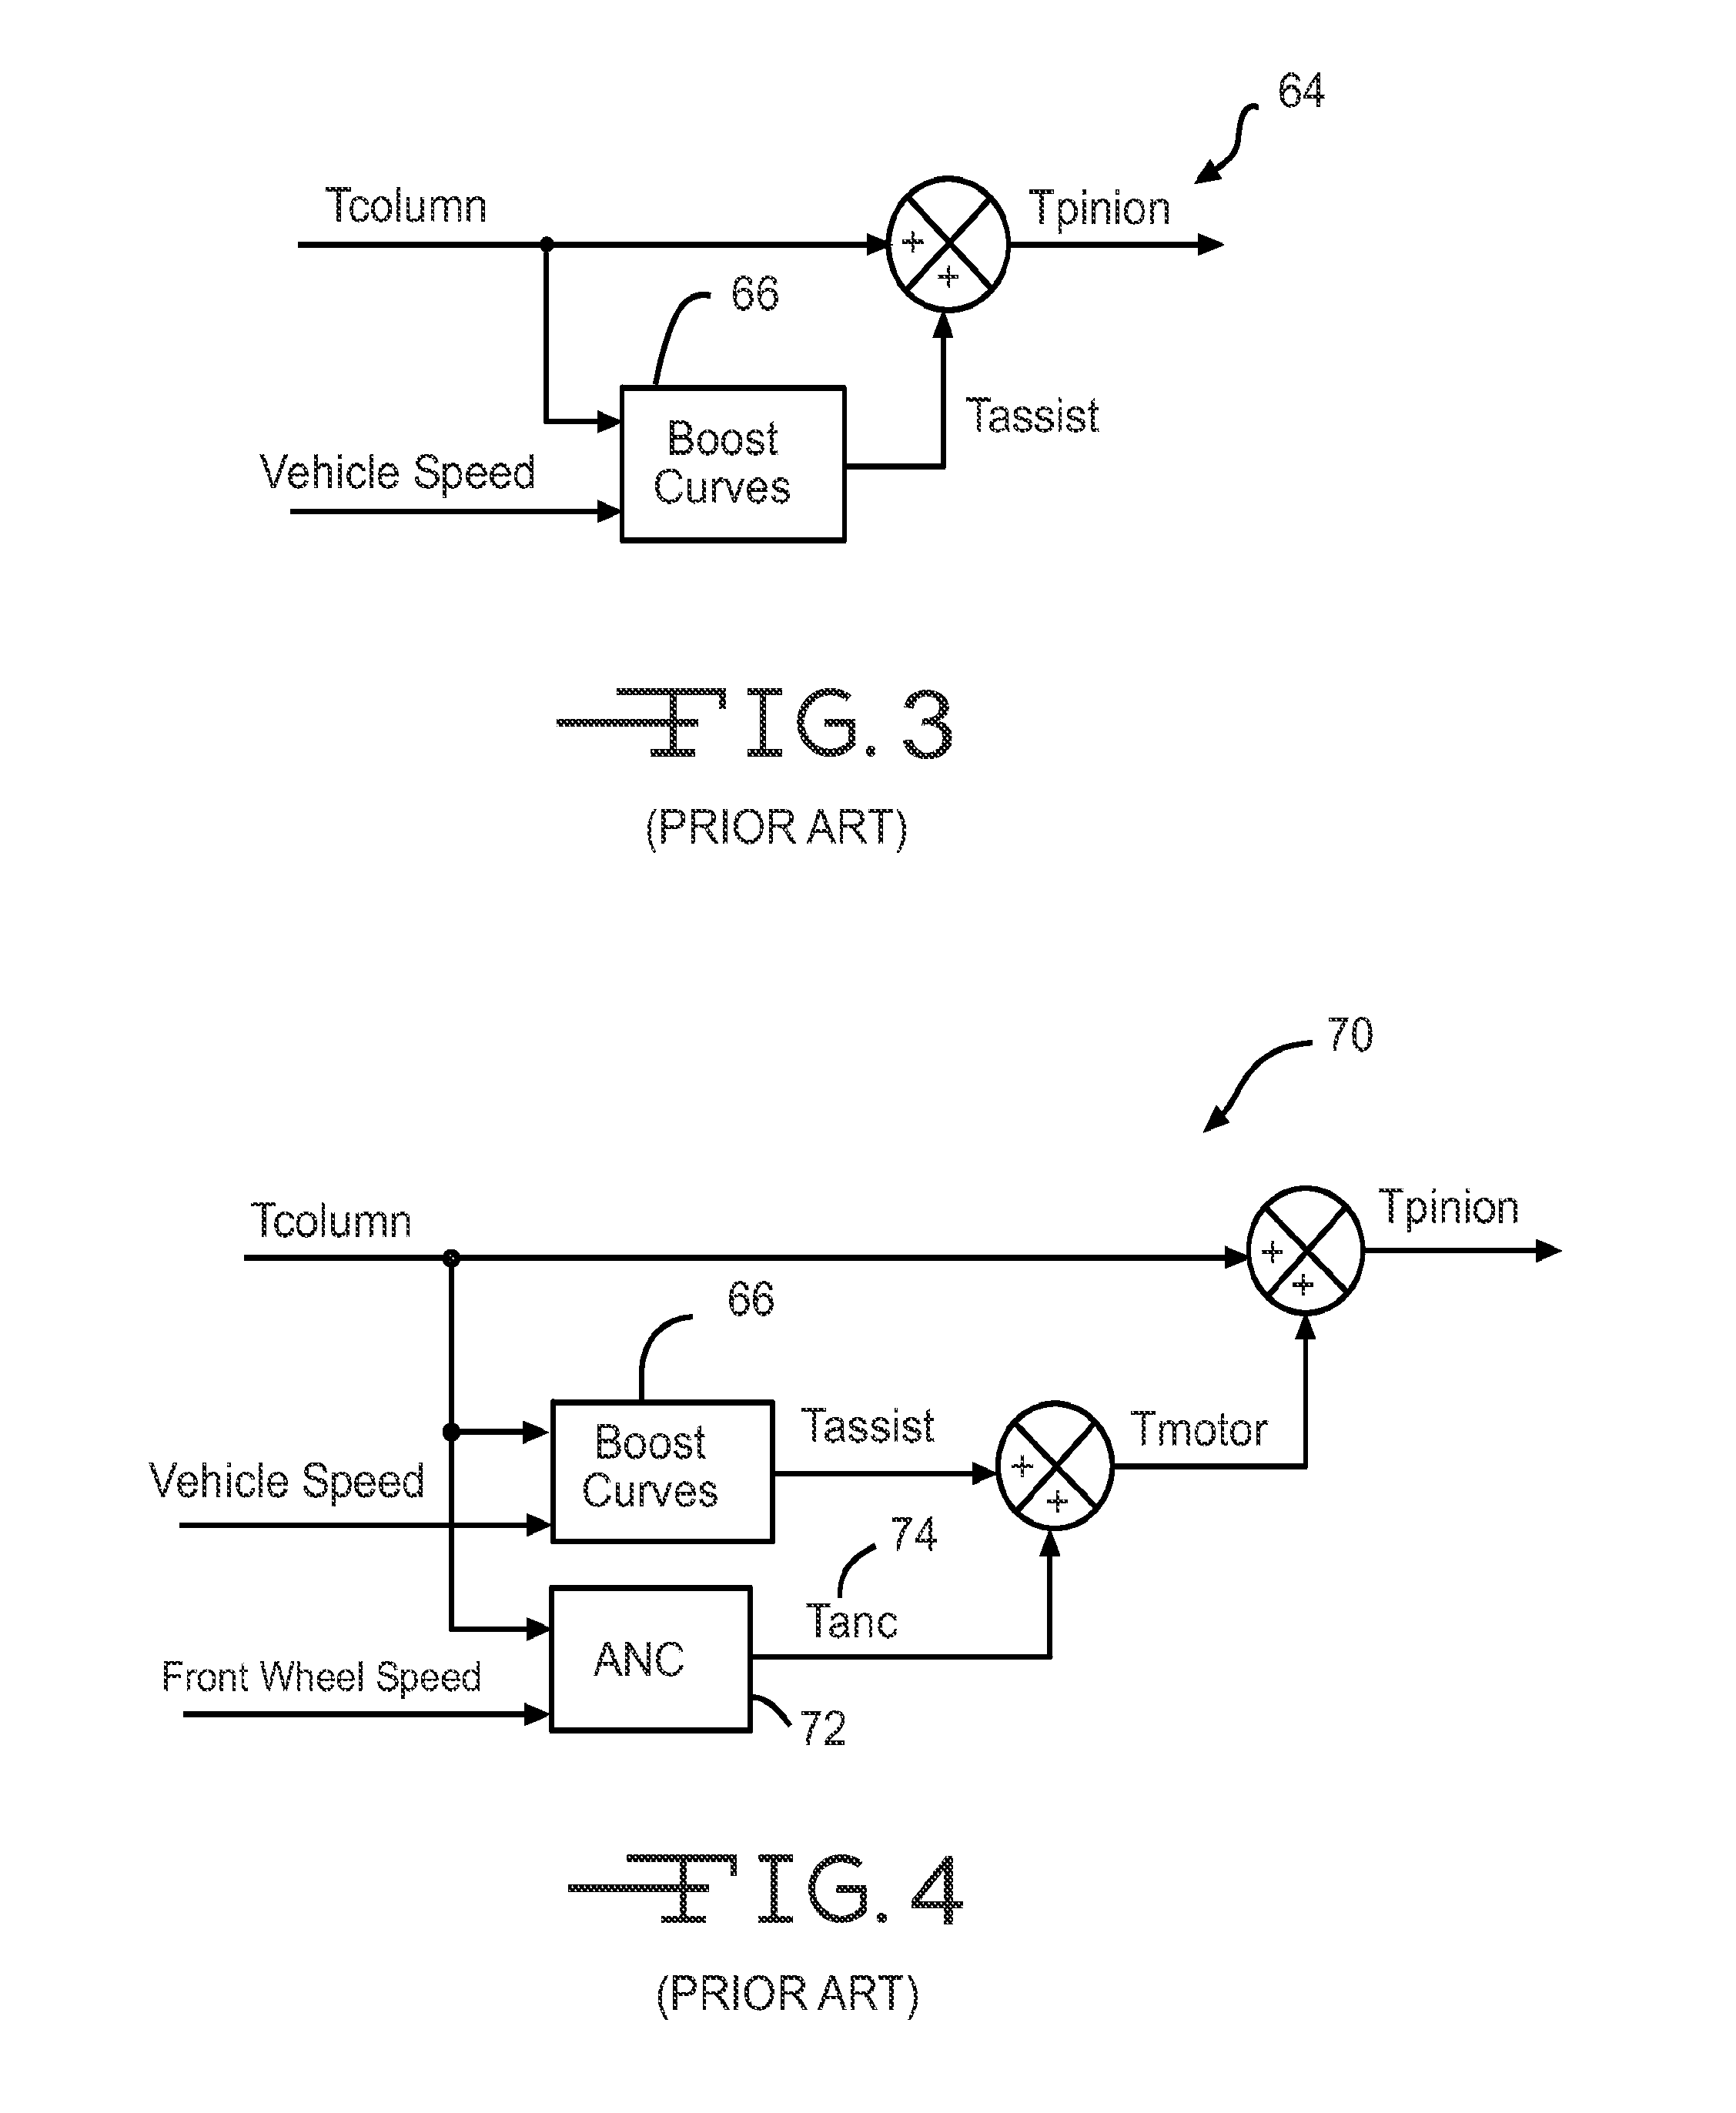 System and Method for Wheel Disturbance Order Detection and Correction